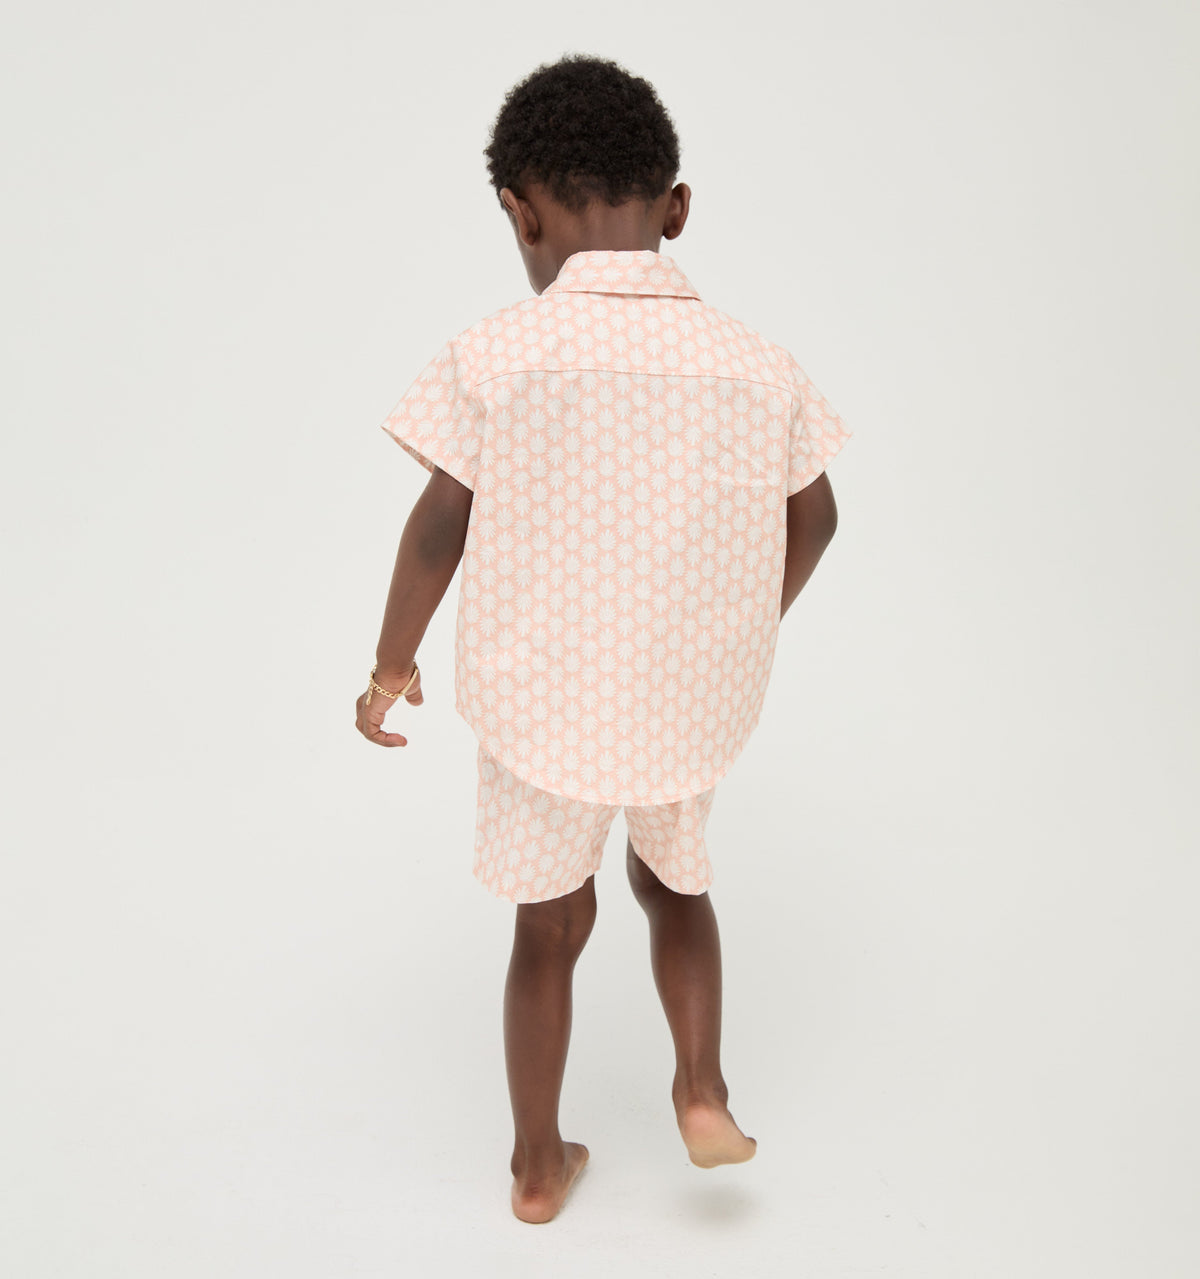 The Tiny Leo Short in Pale Coral Baroque Shell Cotton Sateen